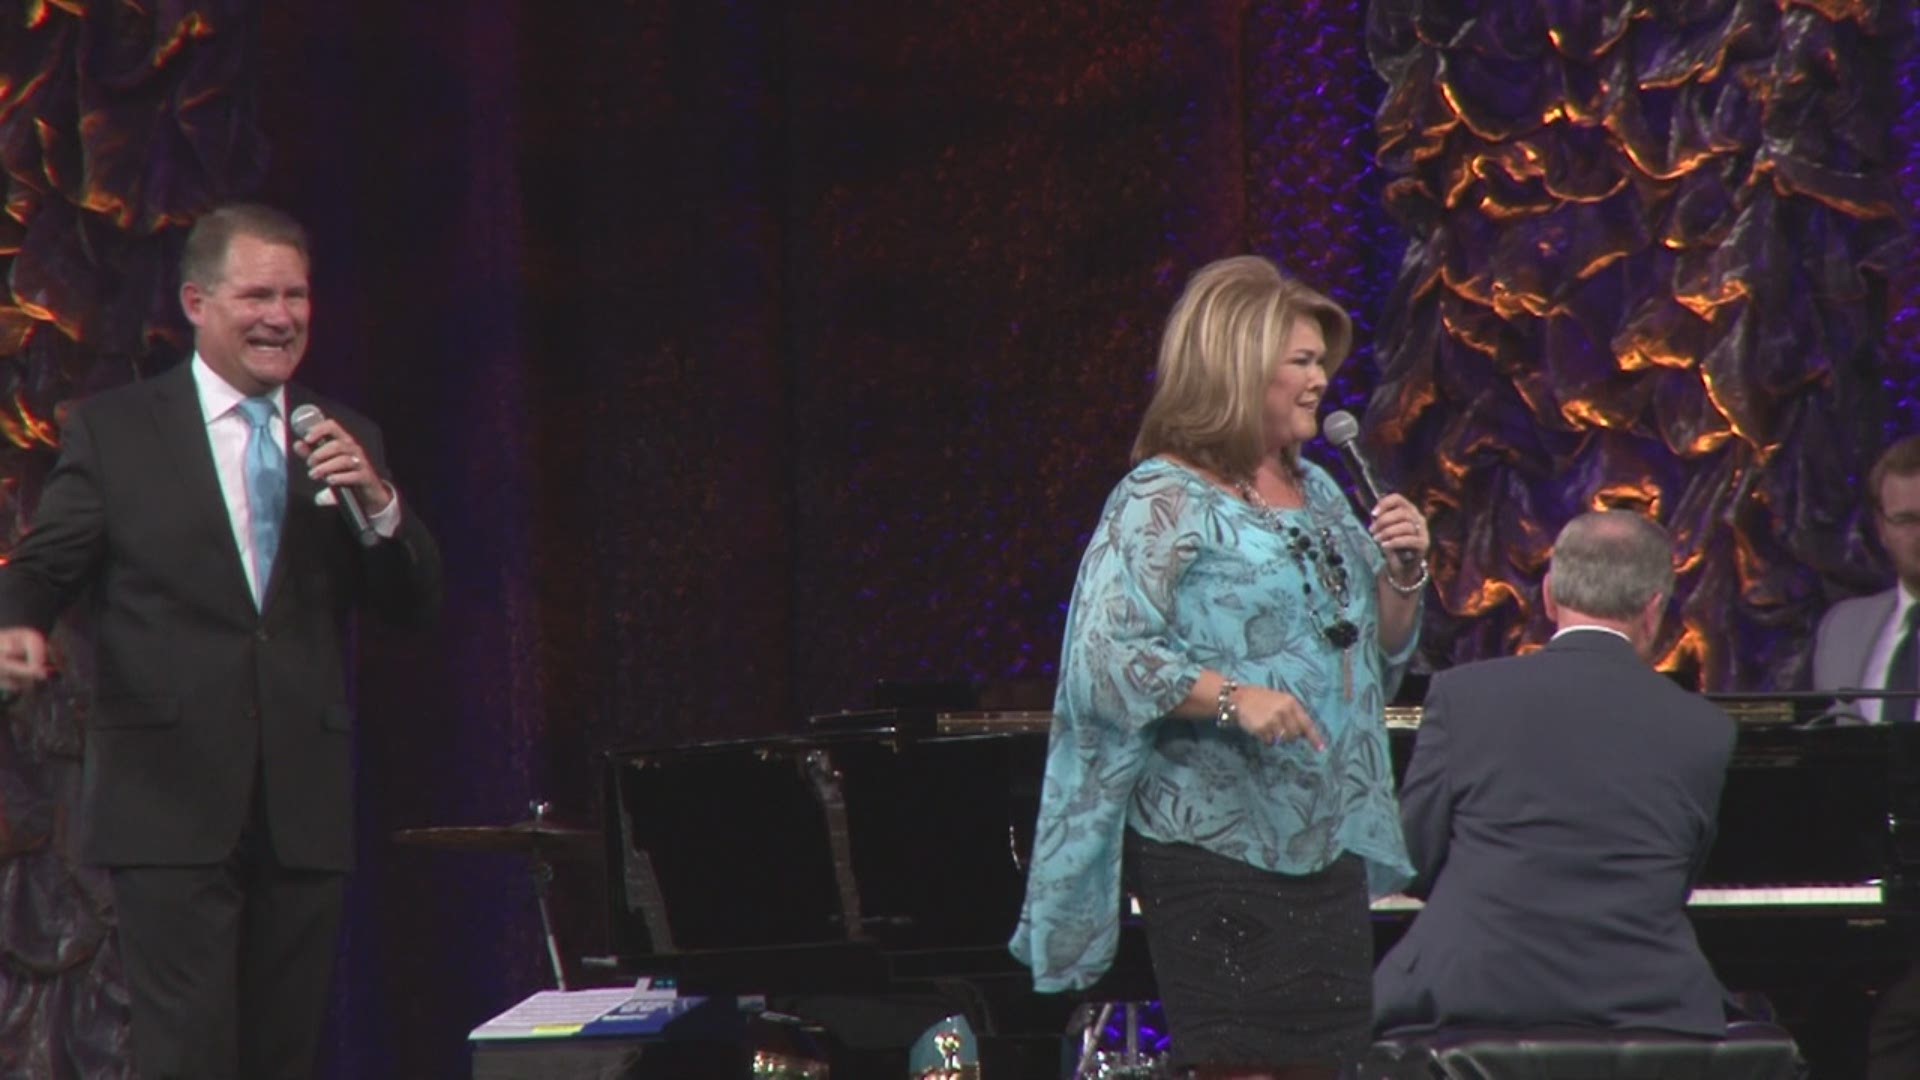 The National Quartet Convention kicked off its week long Gospel concert series Sunday night.